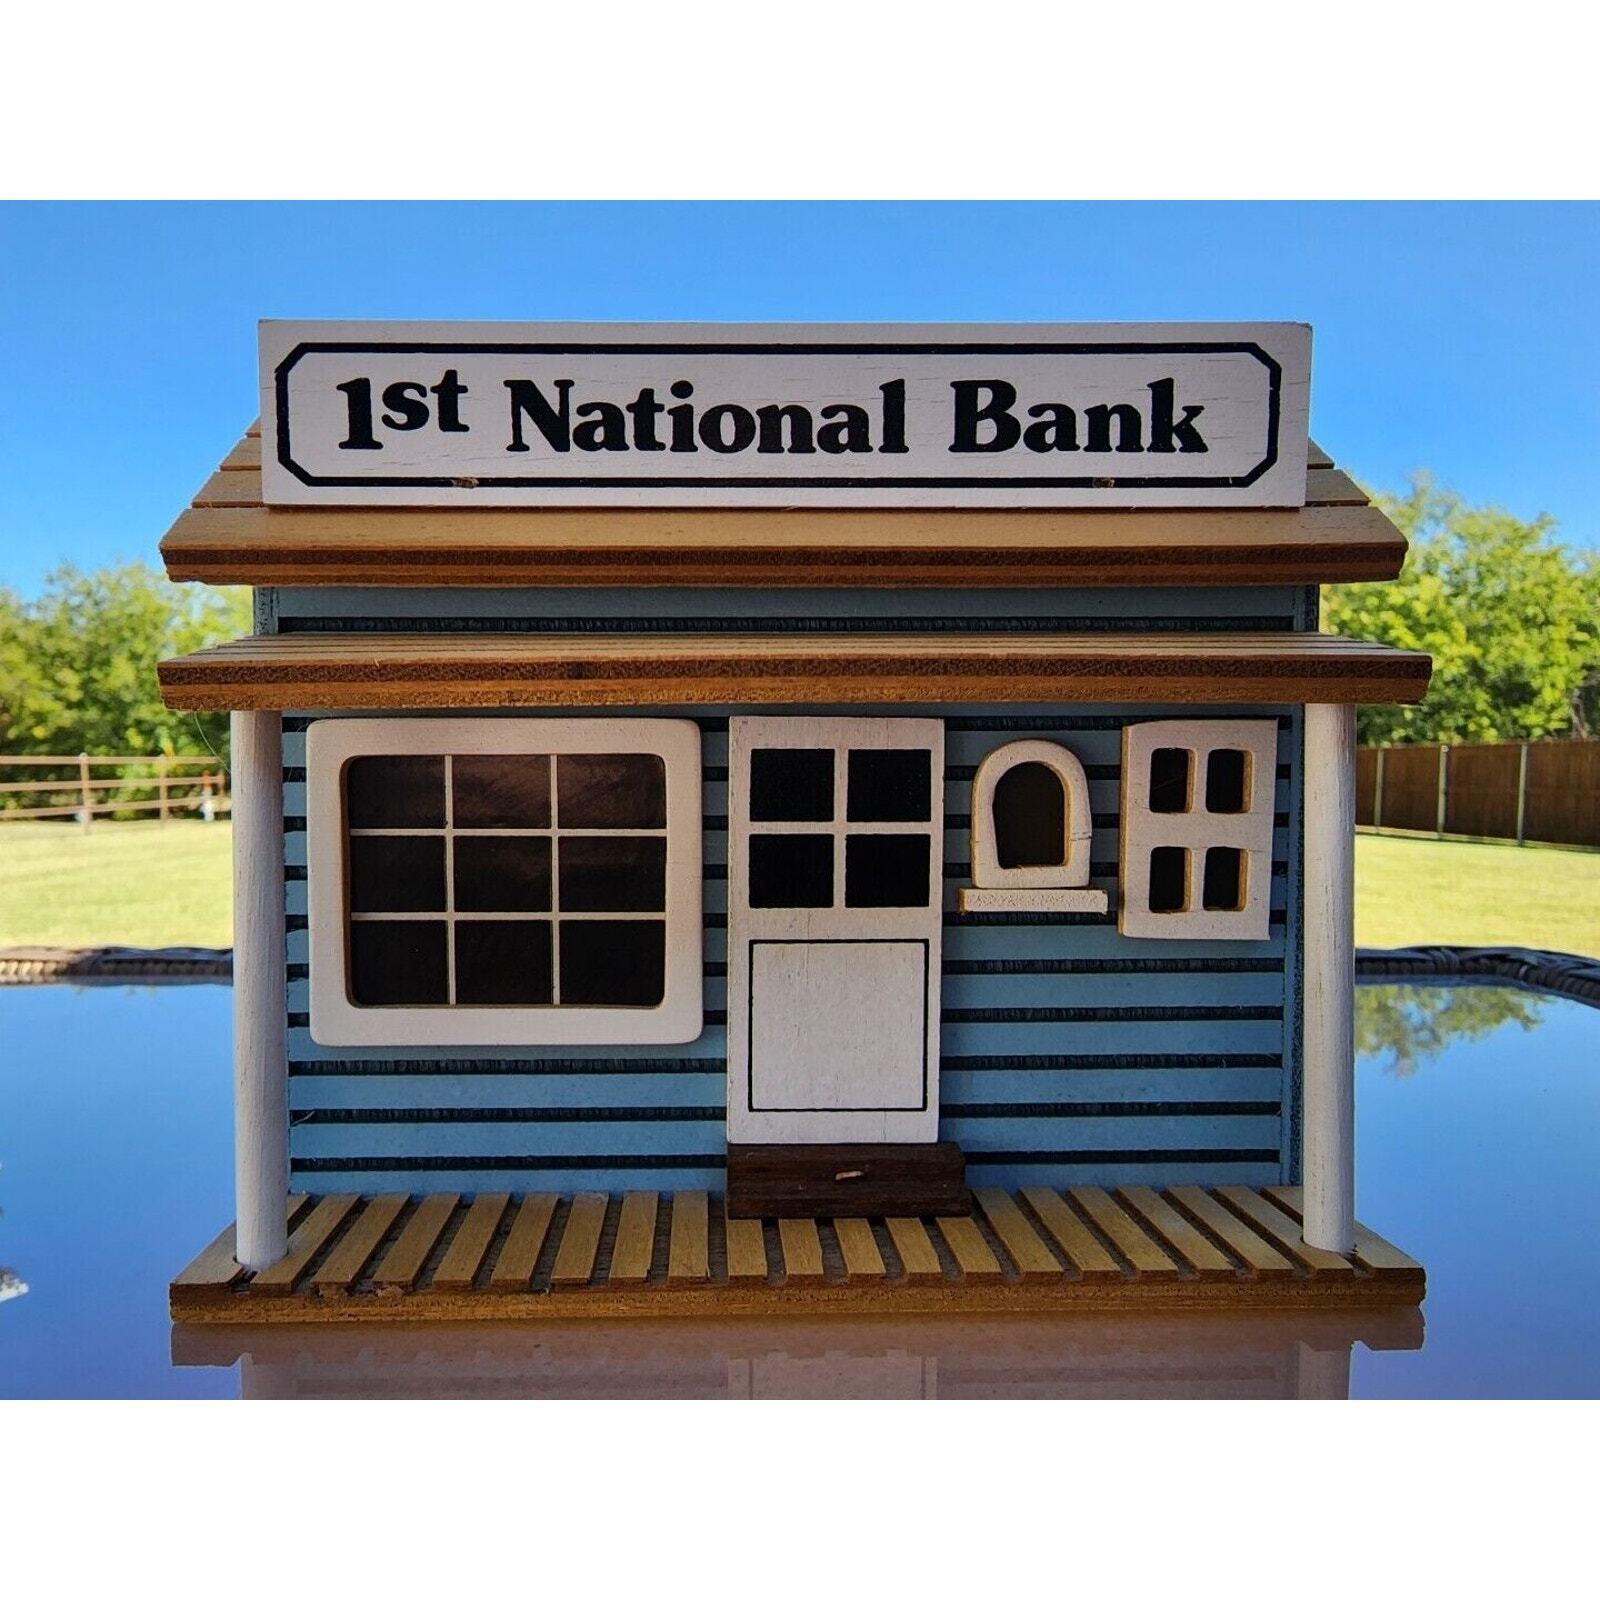 VTG Wind Up Musical 1ST NATIONAL BANK with hinged roof Handmade RARE EXCELLENT